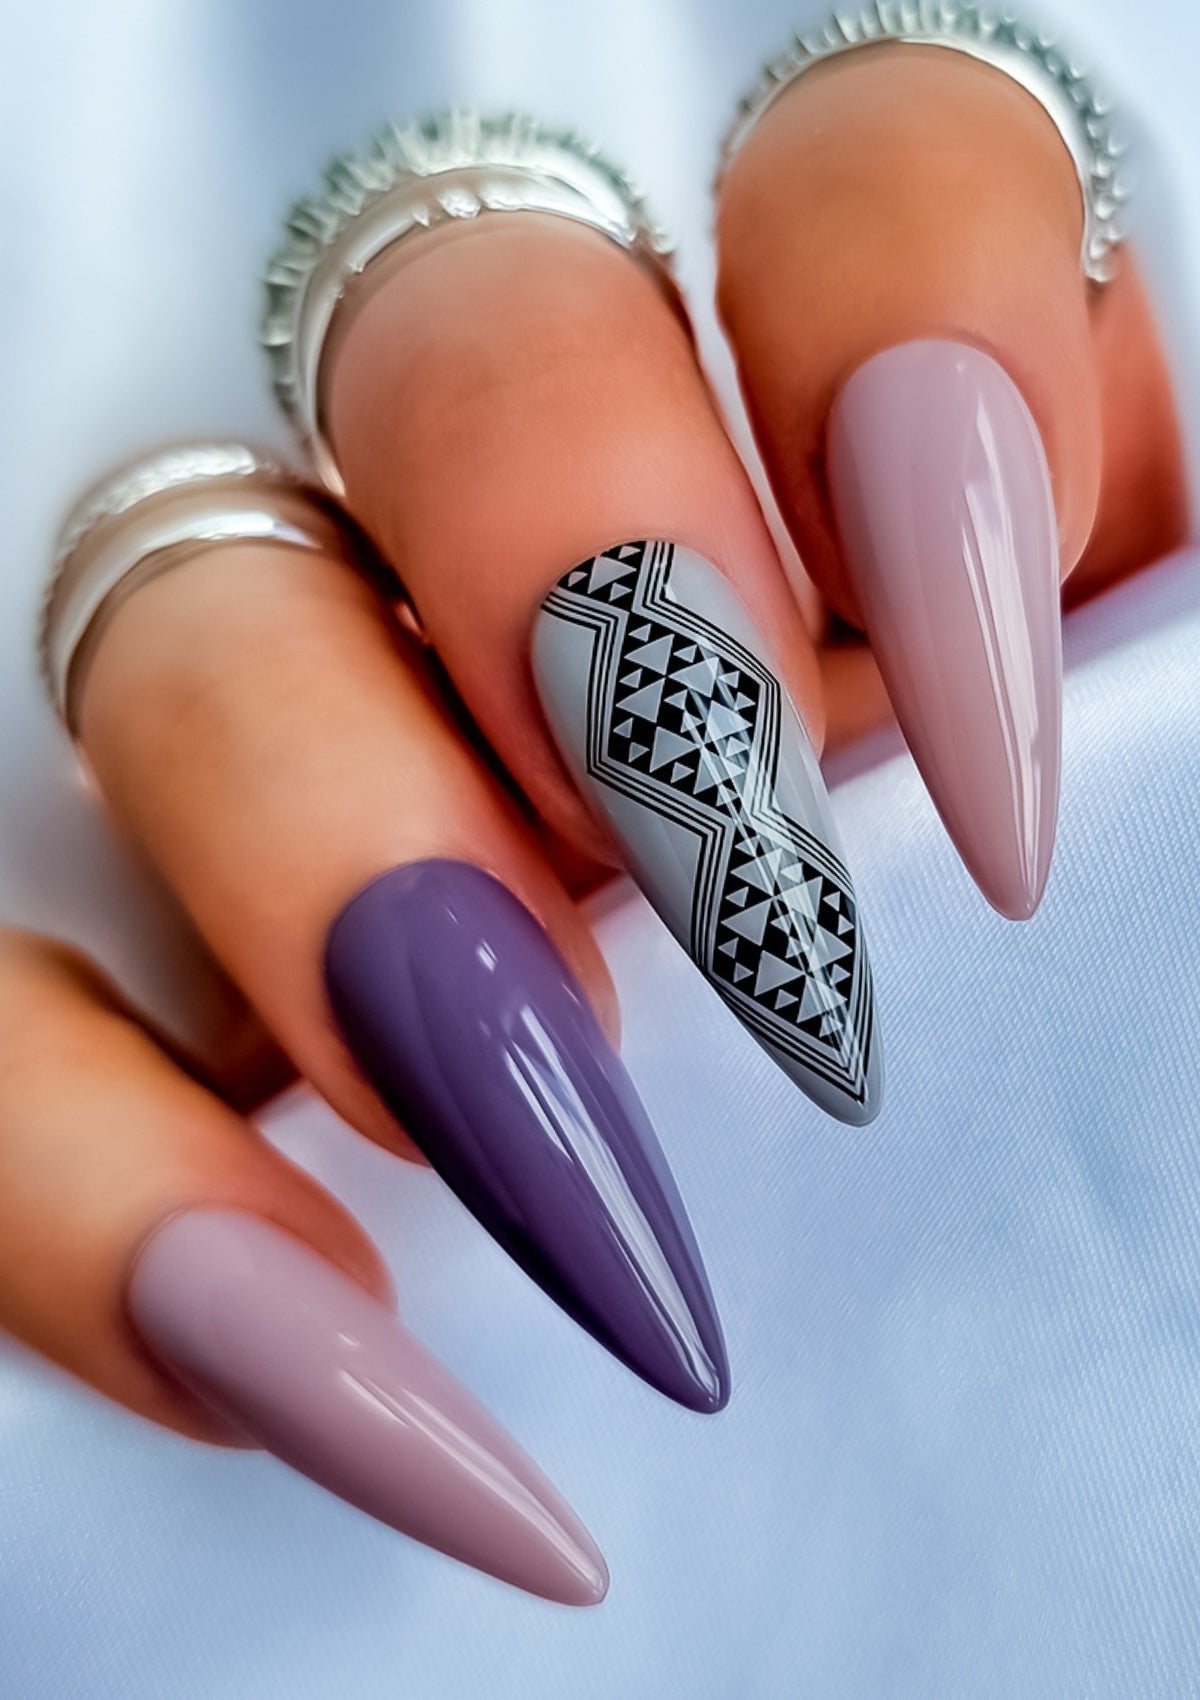 Long almond shaped nails in different shades of mauve and grey  with black Maori nail art on the middle finger. Nail art design in Aonui pattern by Adrienne Whitewood.  